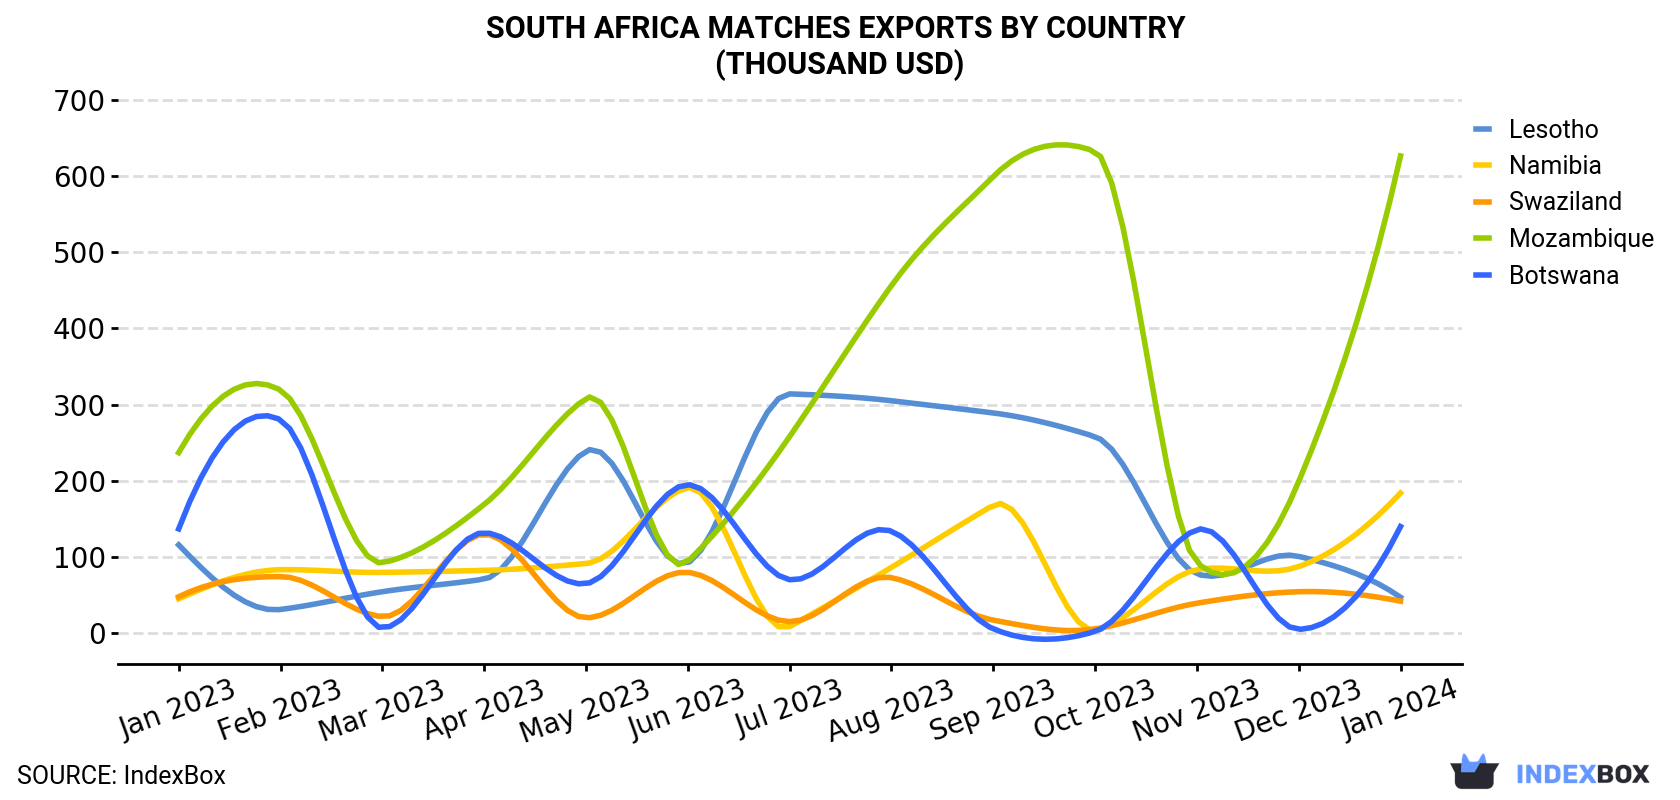 South Africa Matches Exports By Country (Thousand USD)